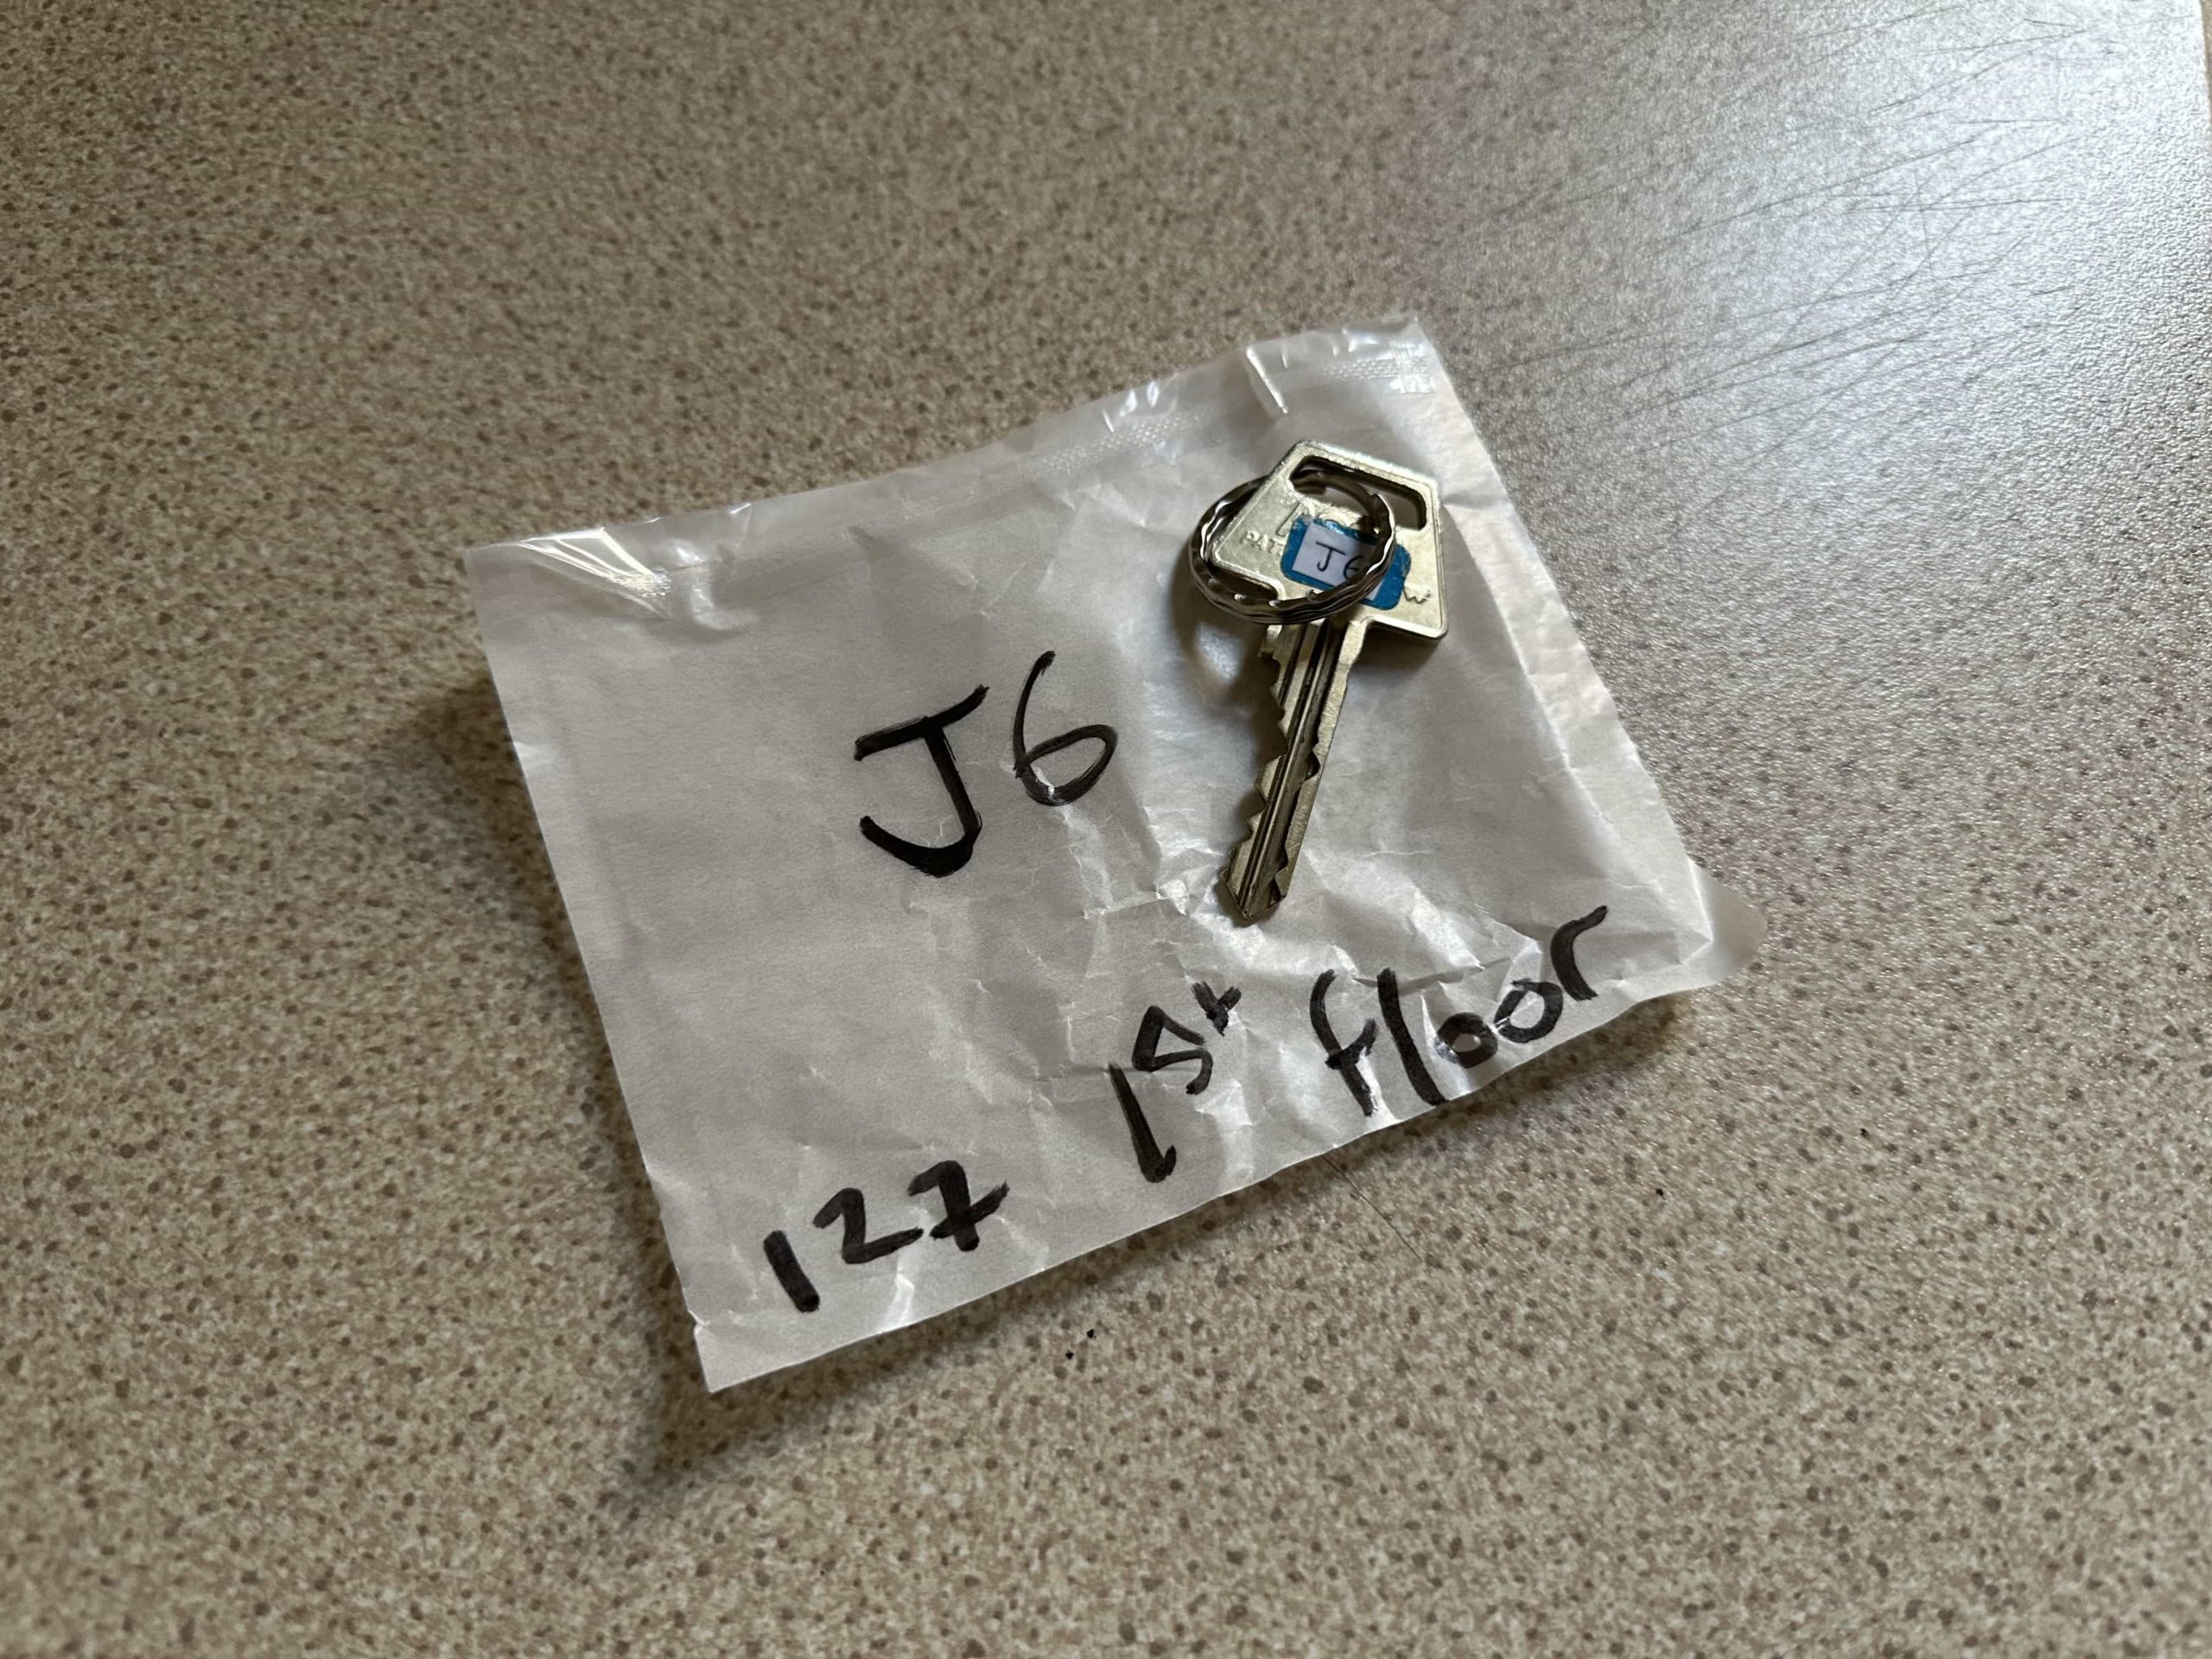 A packet marked with room details, and a key lying on top